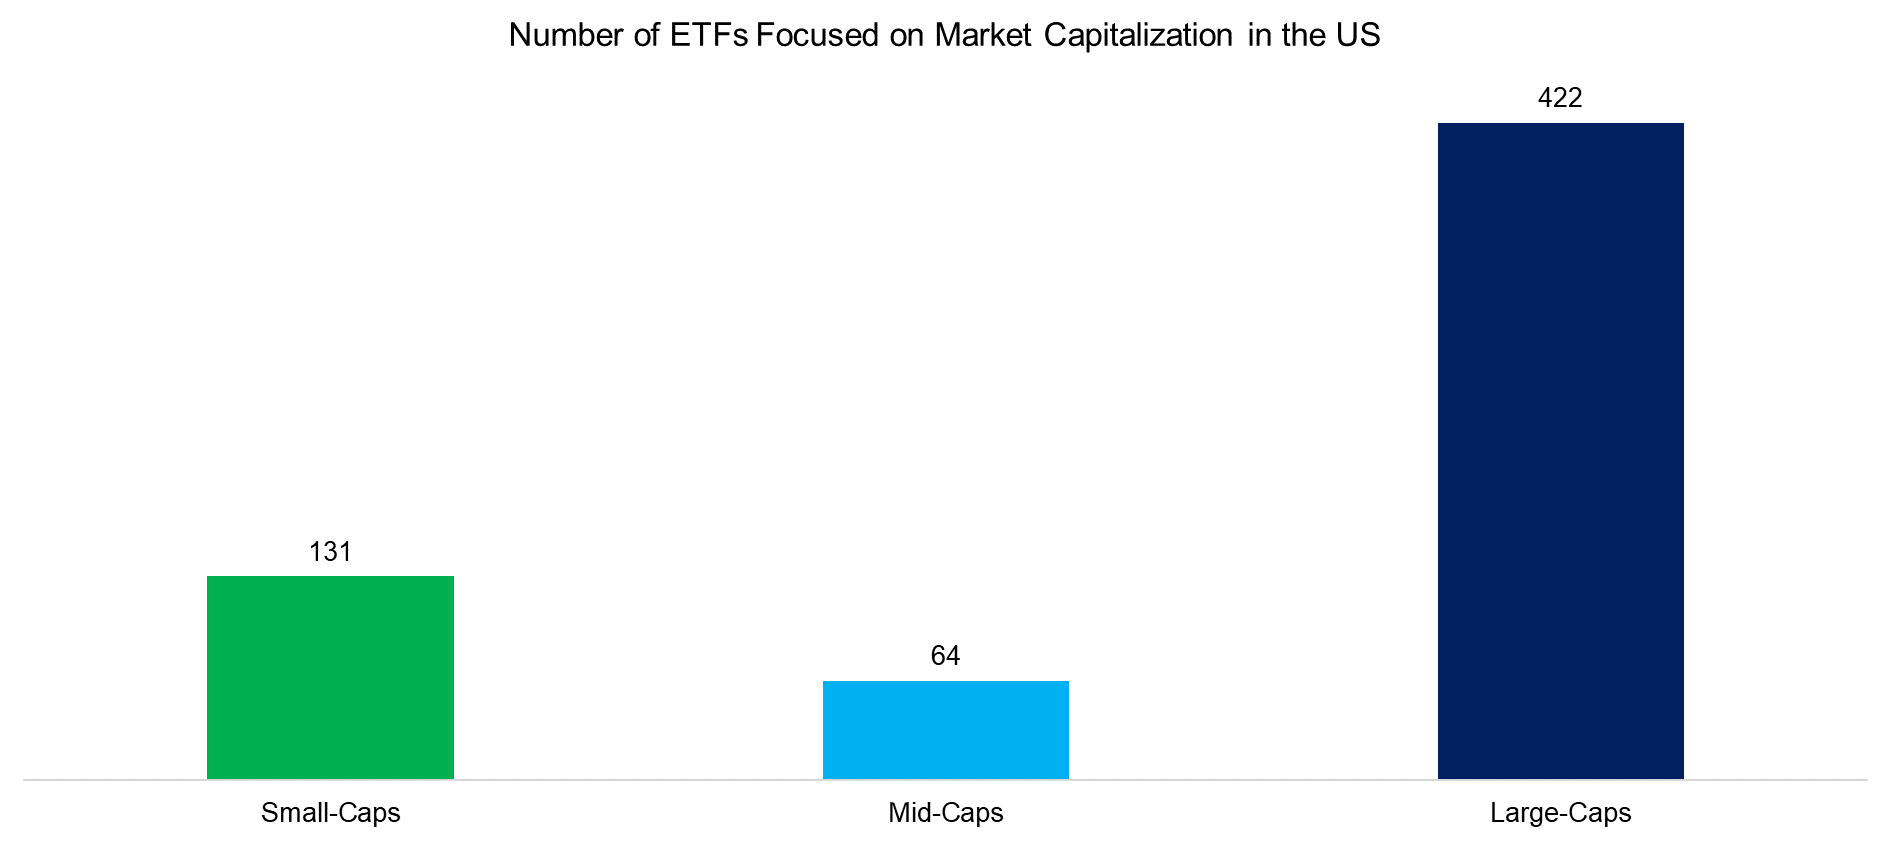 Number of ETFs Focused on Market Capitalization in the US